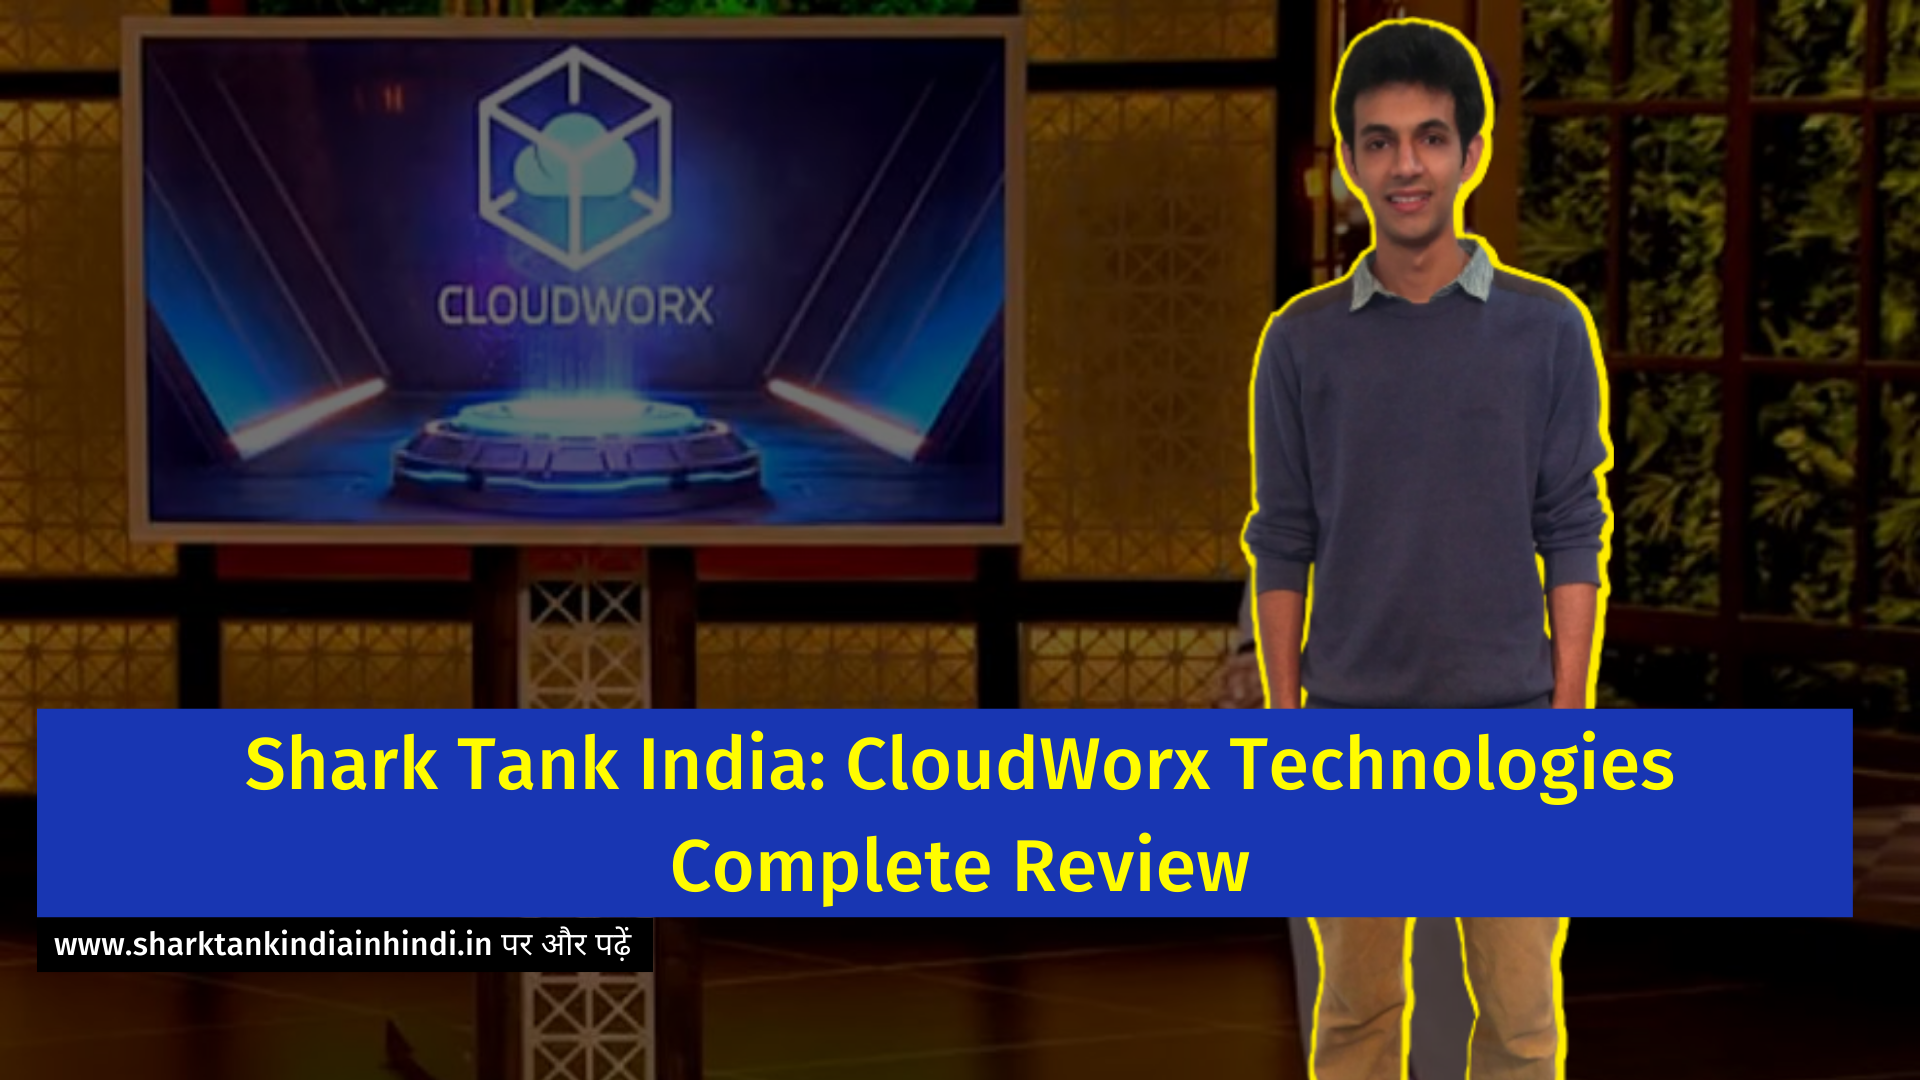 Shark Tank India: CloudWorx Technologies Complete Review